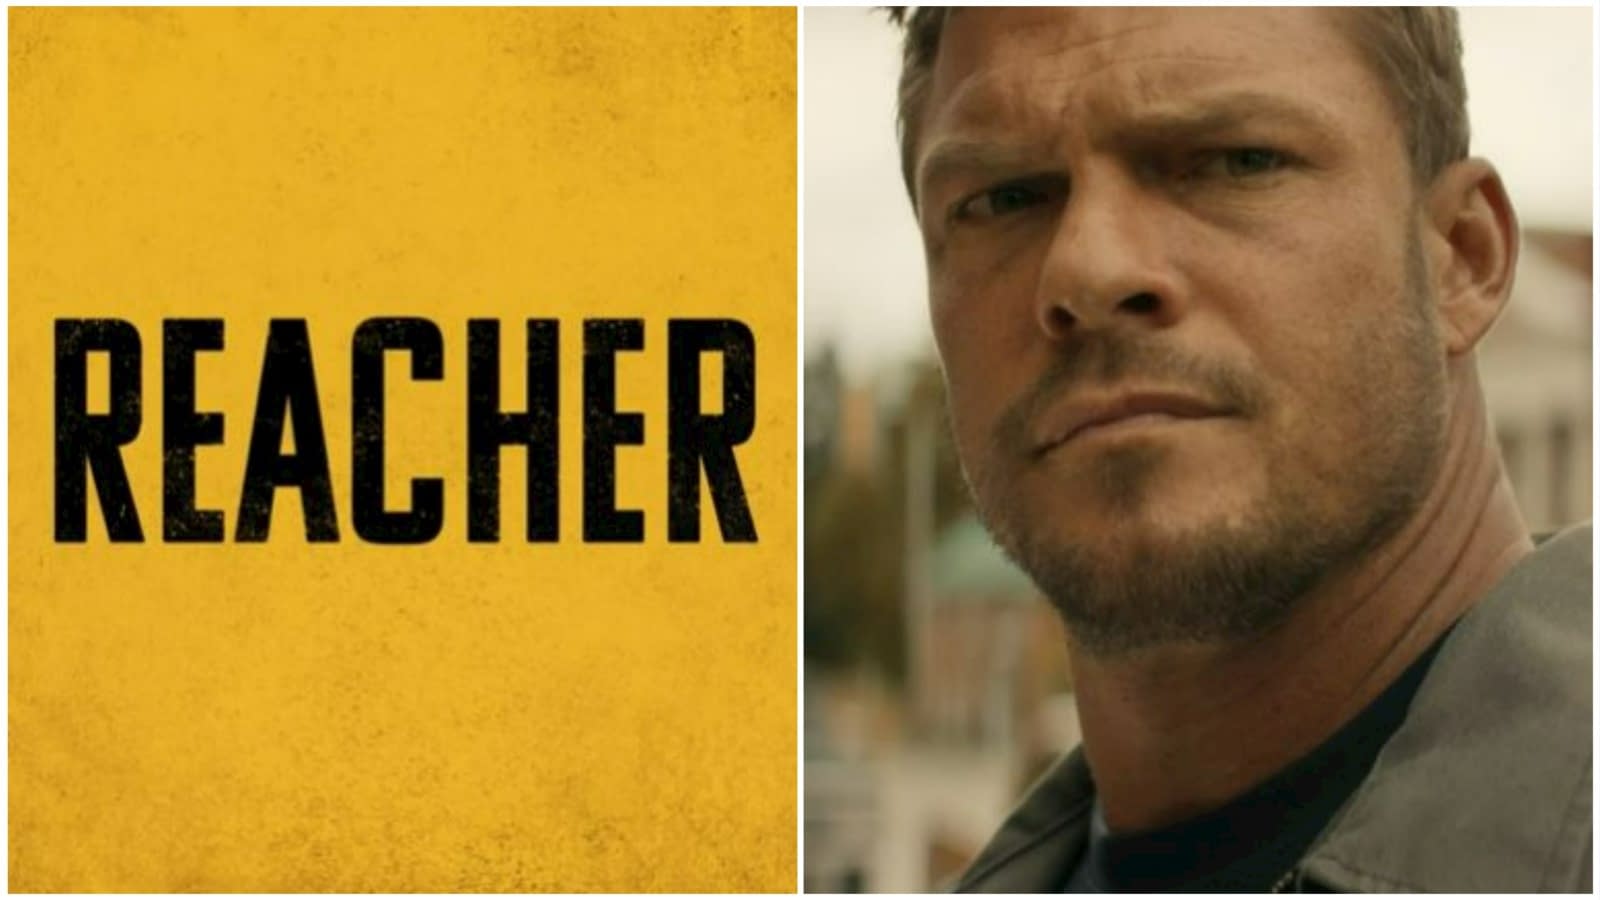 Reacher season 2: Trailer, release date and everything we know